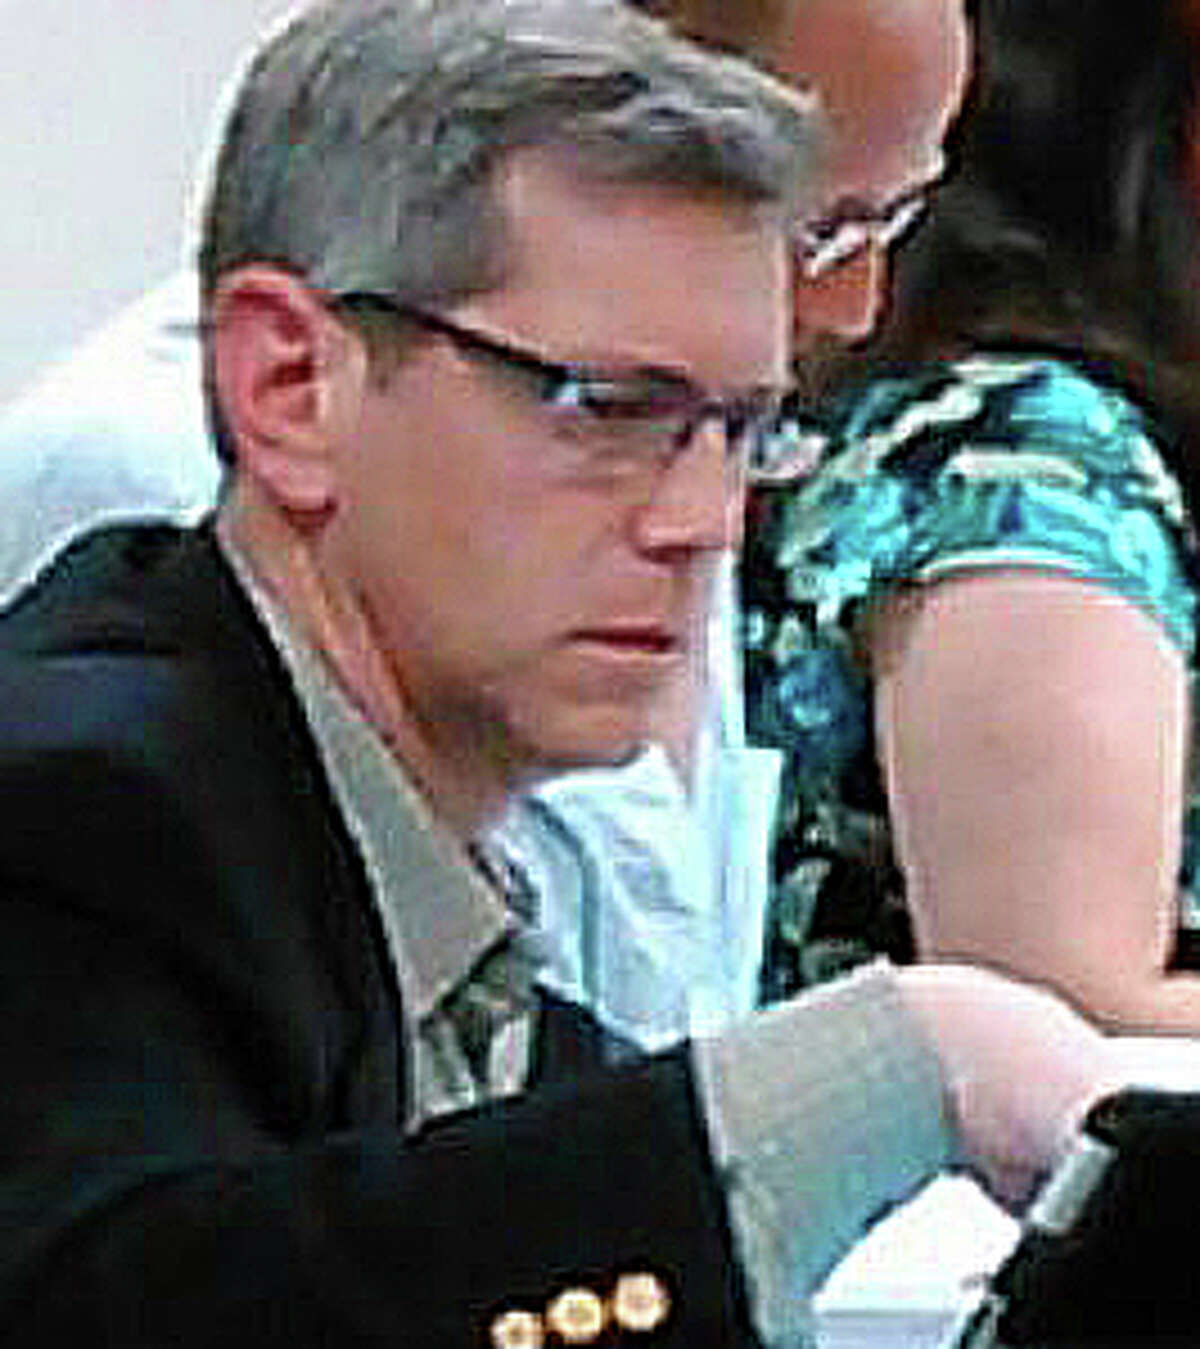 Board of Education member Marc Patten, shown in a photo from a meeting last year, said this week as the panel considered implications of possible redistricting, that for the last two years he did not want to ìgo anywhere near the ëRí word,î but is less sure about that now. He said if redistricting had to be revisited, ìI guess Iím your third member of your subcommittee.î